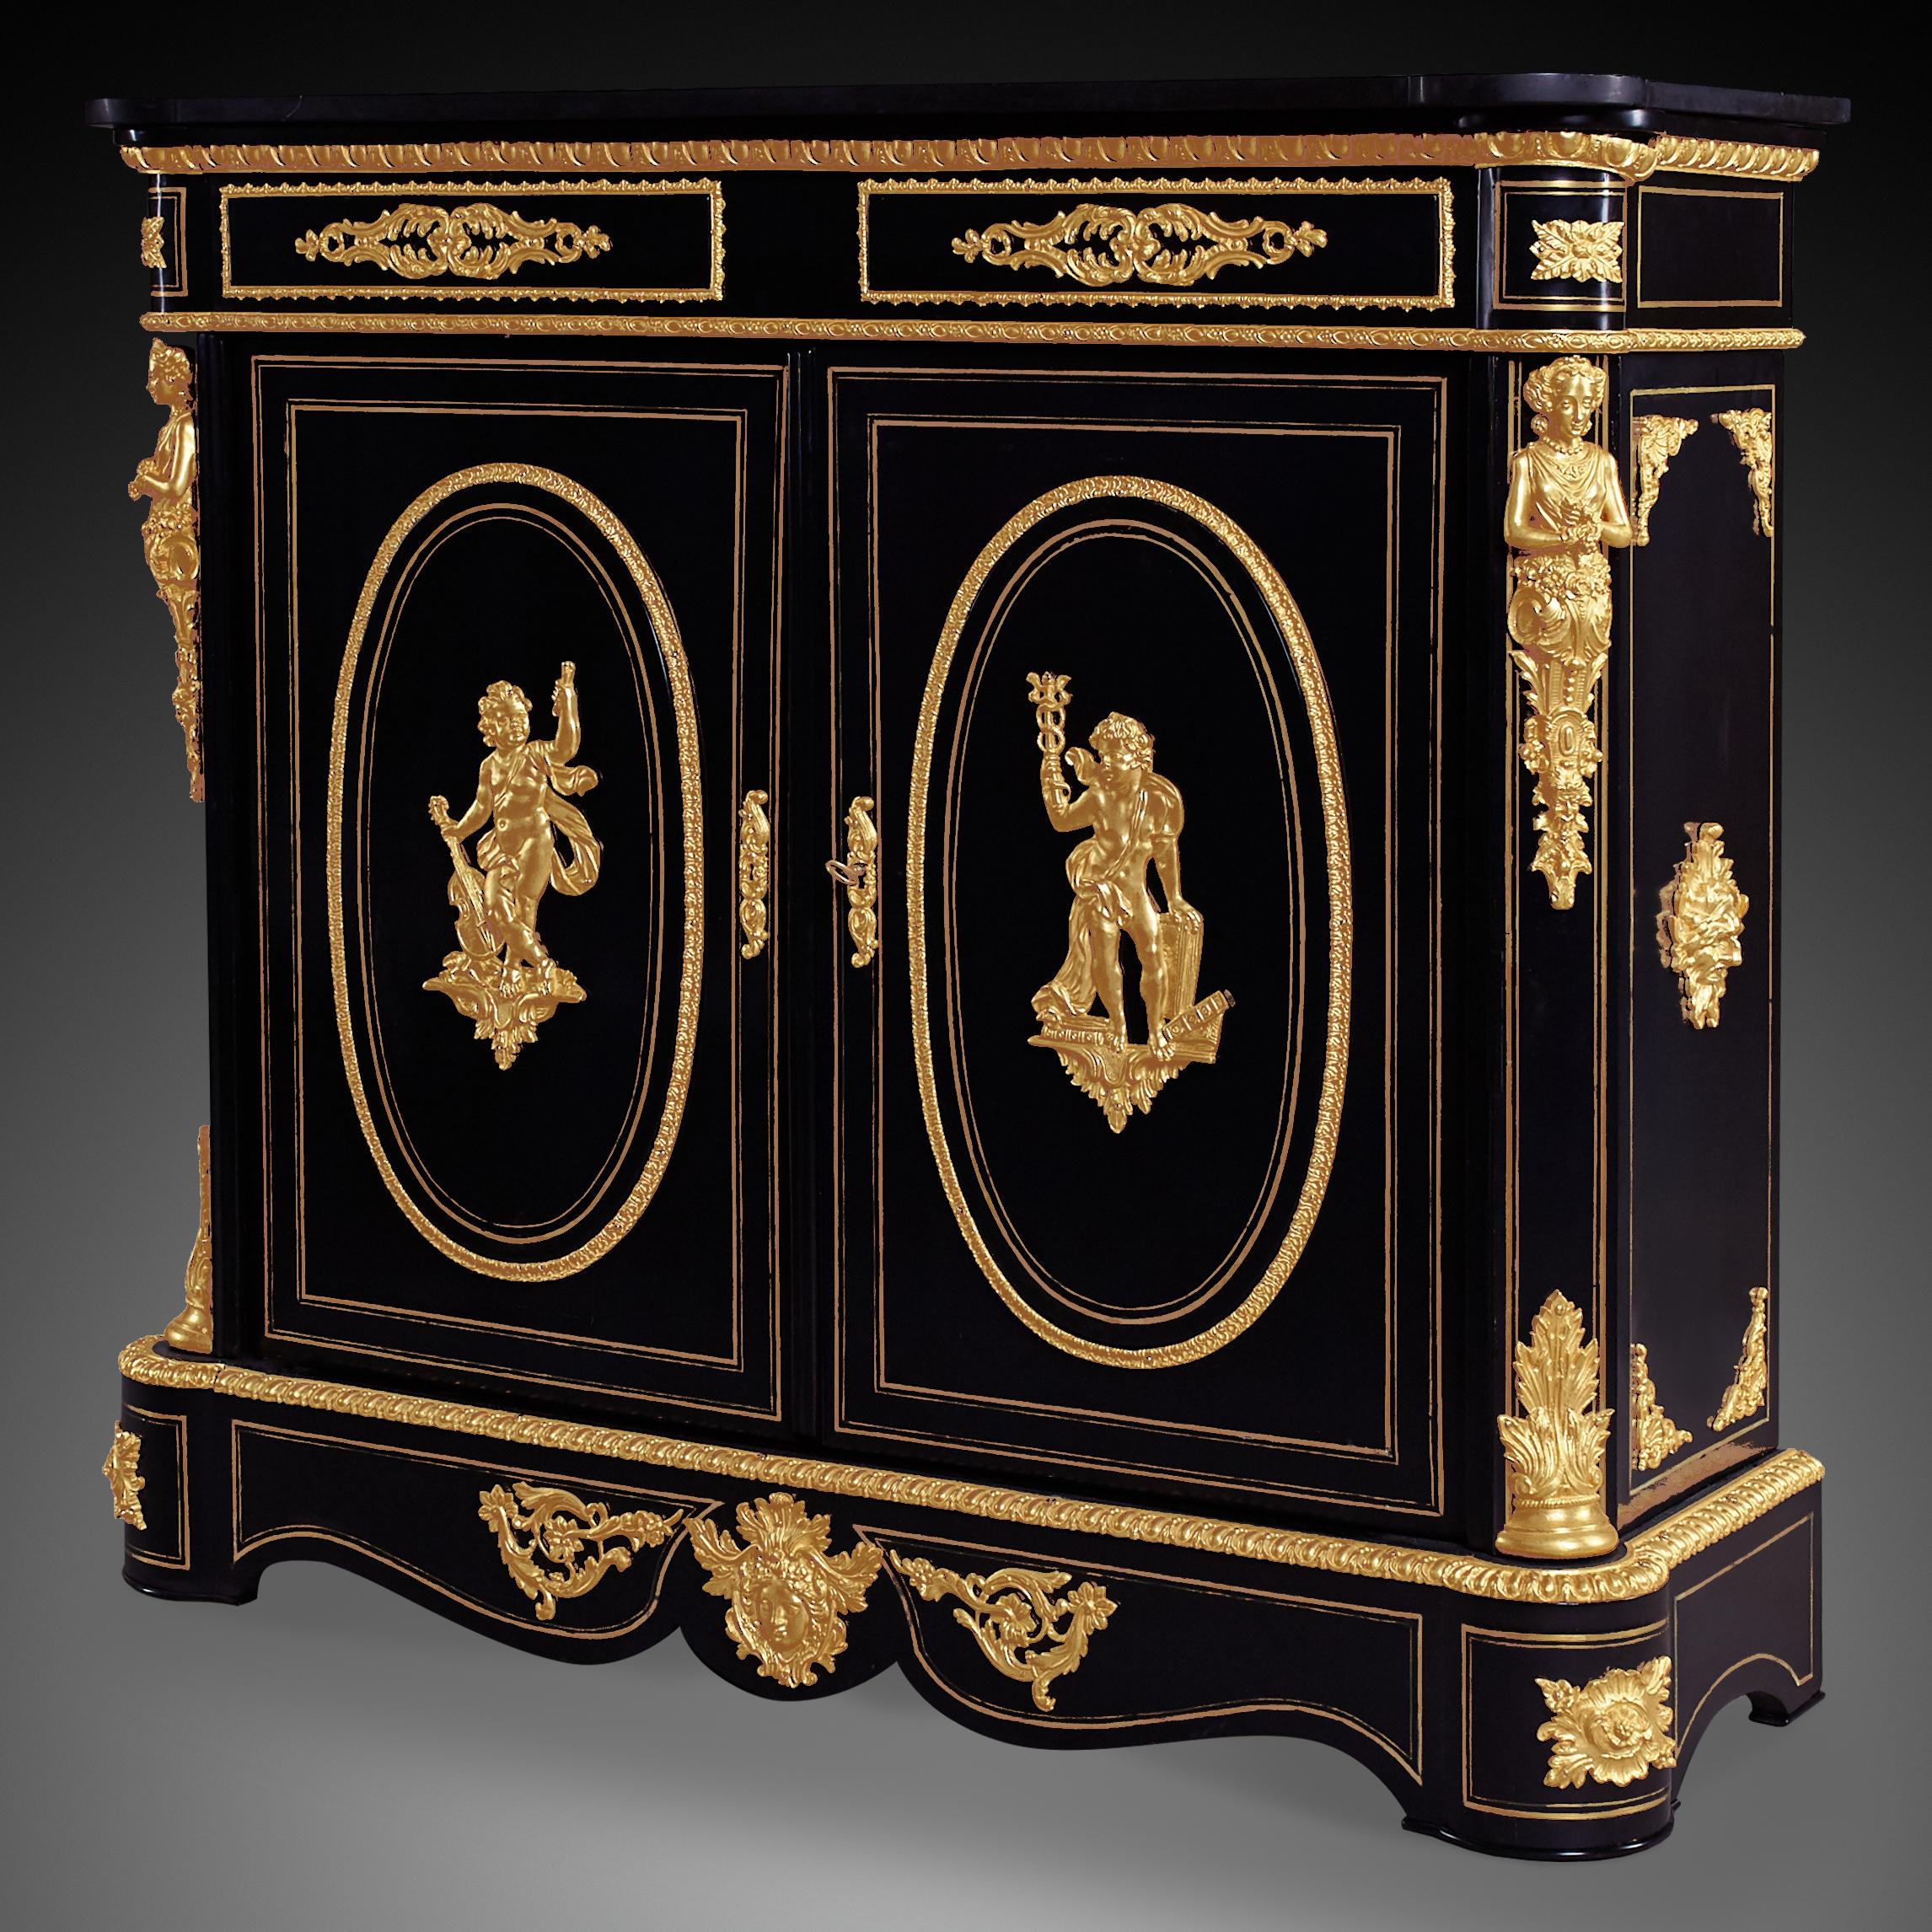 A magnificent rectangular black 2-door cabinet in Napoleon III style. Large and small details are gilt, bringing antique and luxurious looks. Brass medallions are centrally mounted on each door and also adorn the upper facade of the cabinet. The